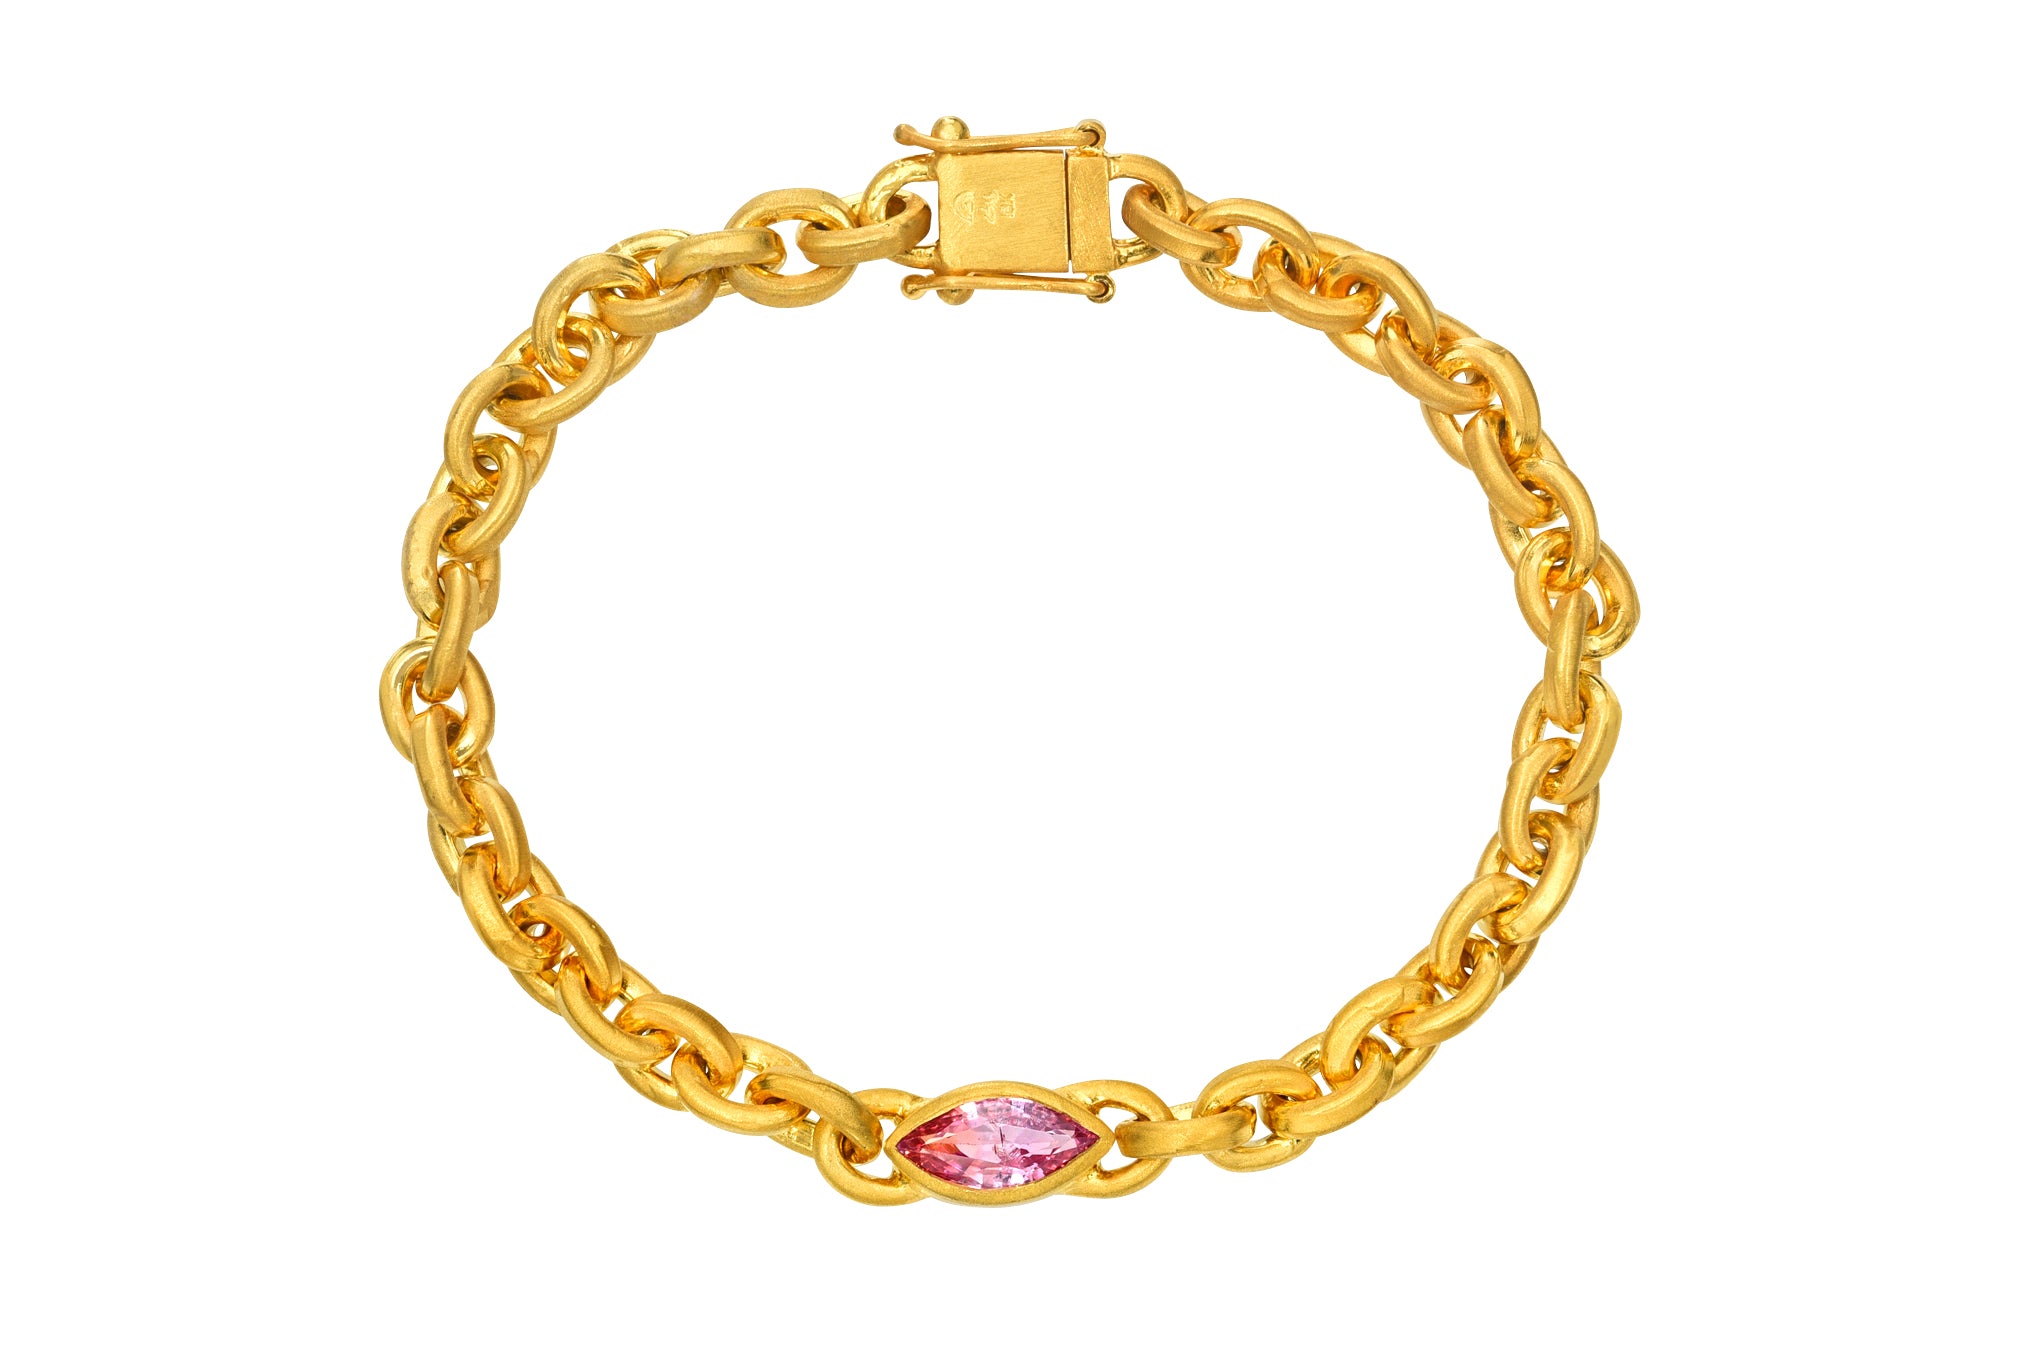 ONE OF A KIND MARQUISE PINK SAPPHIRE OVERSIZED SIGNATURE CHAIN BRACELET